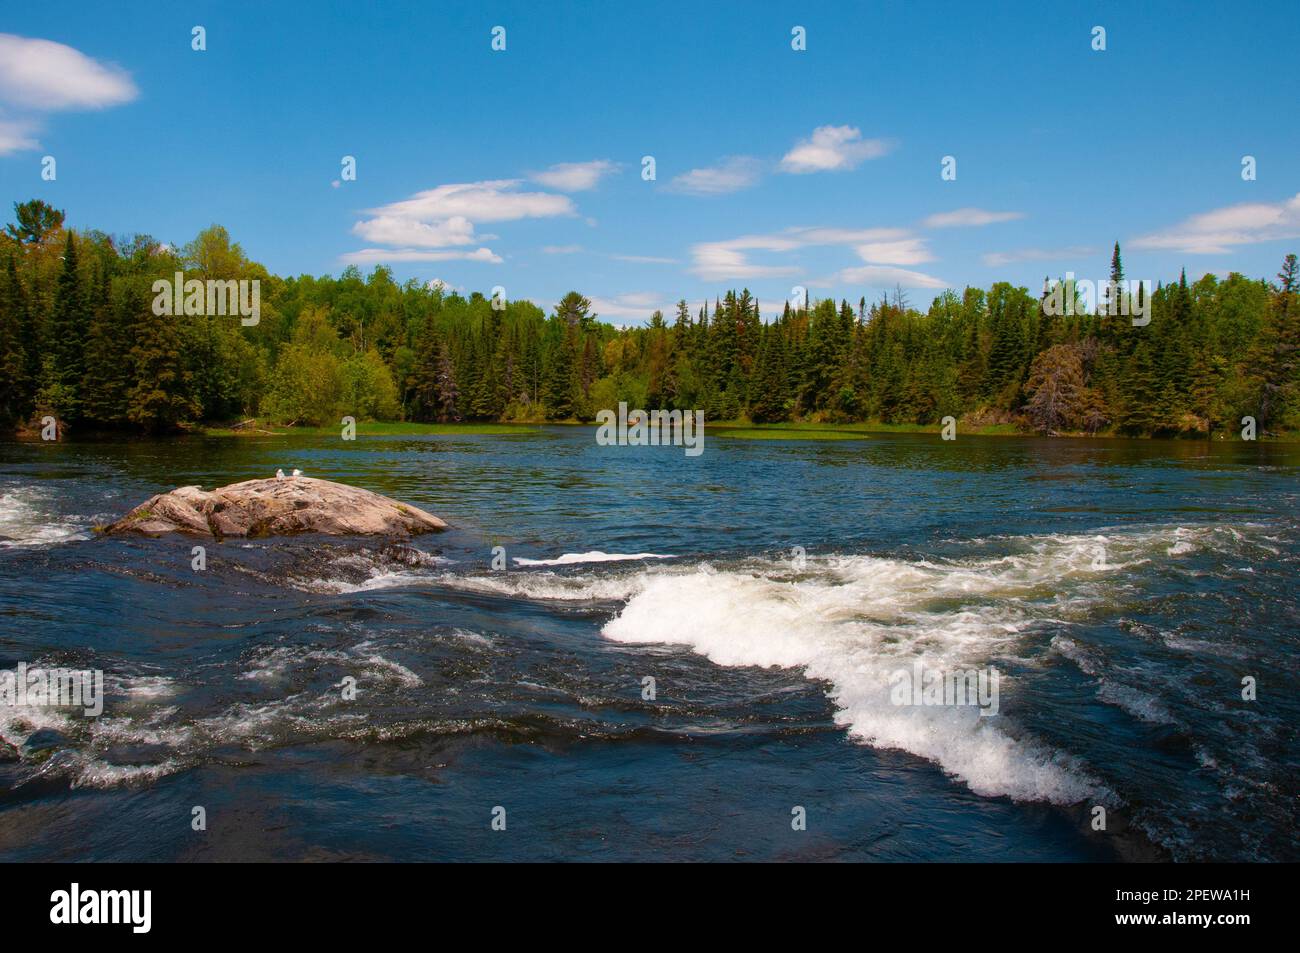 Summer scenery with rapids, blue sky, trees, rocks and gulls sitting on a rock in their environment and habitat surrounding. Stock Photo